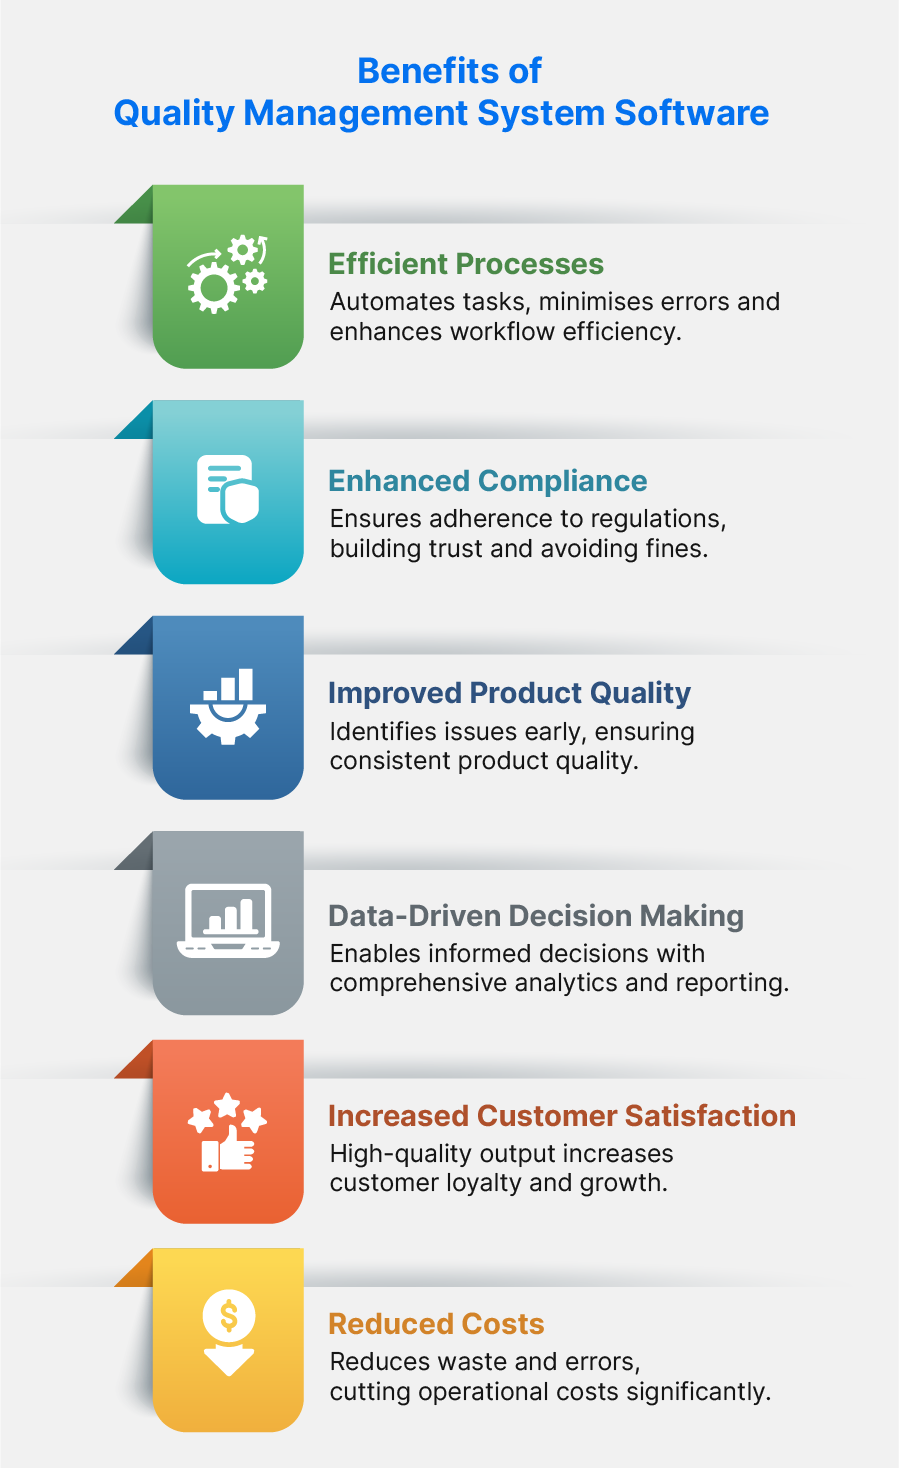 Benefits of Quality Management System Software